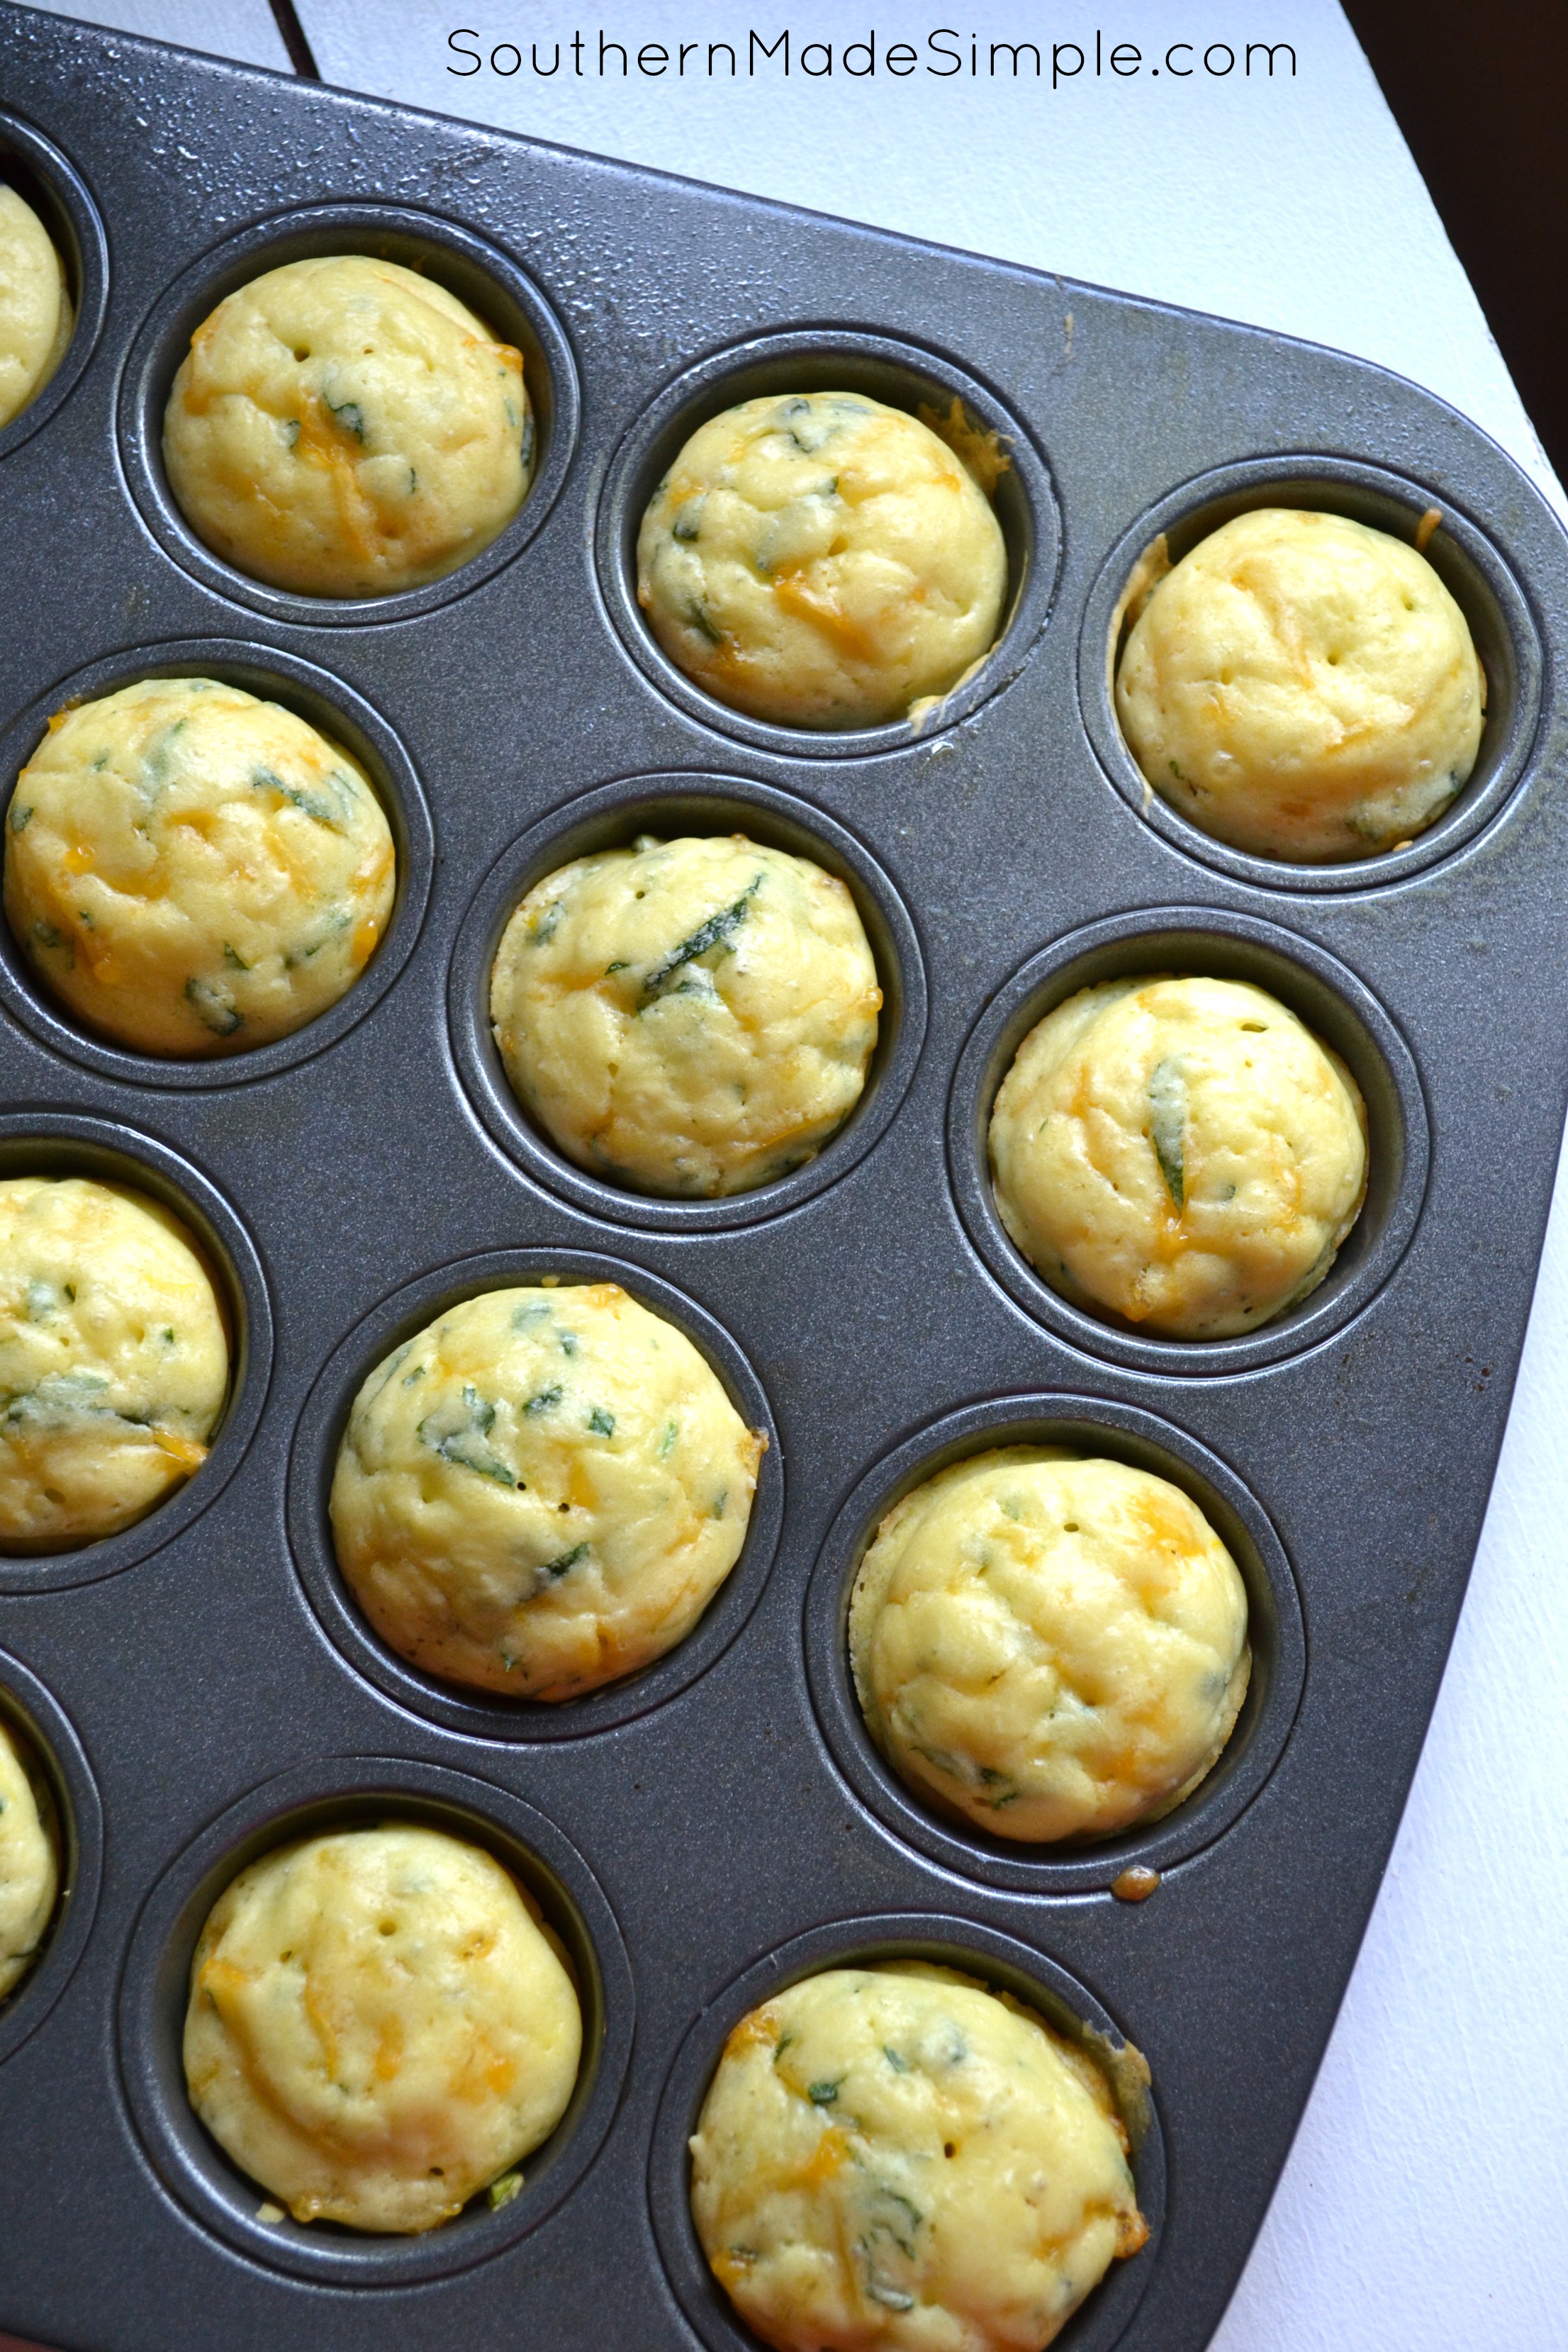 Cheesy Spinach and Kale Pancake Bites - a great finger good for toddlers and PACKED with nutrients they may be missing out on!